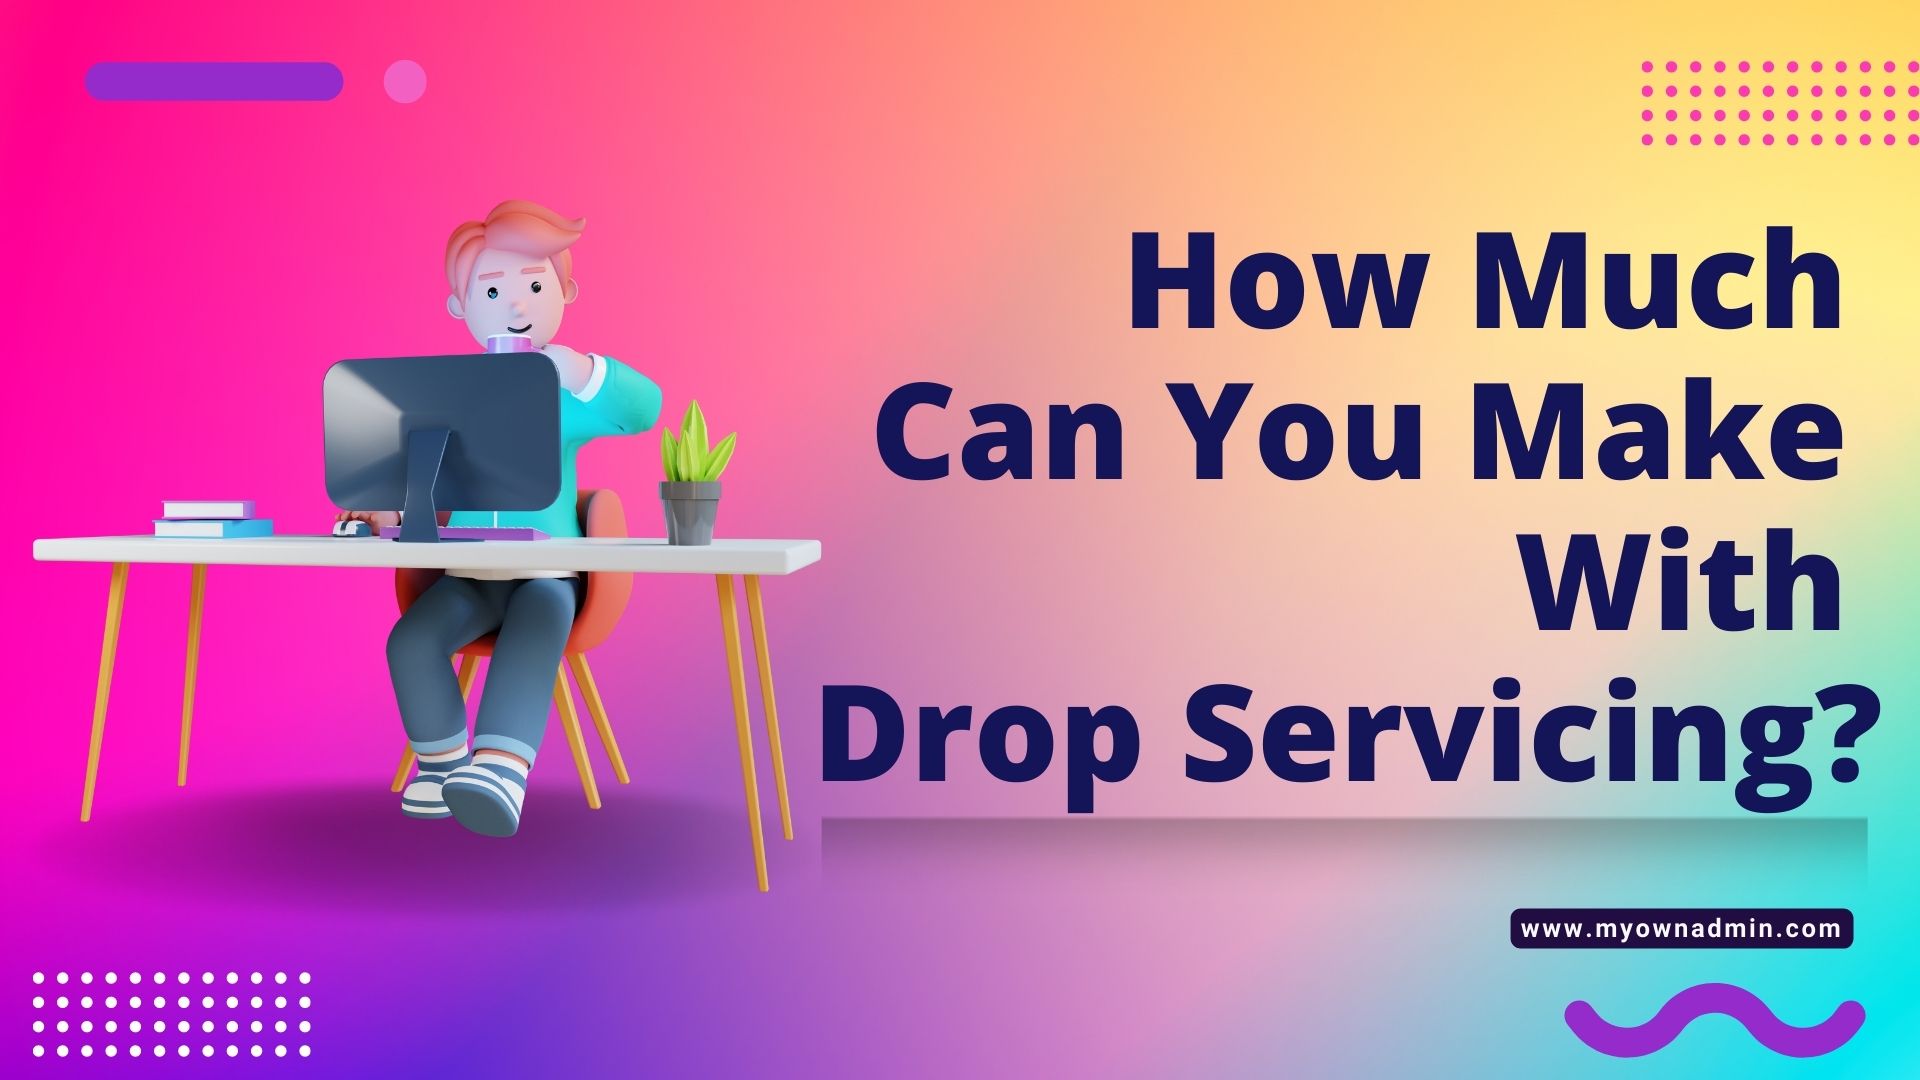 How Much Can You Make With Drop Servicing